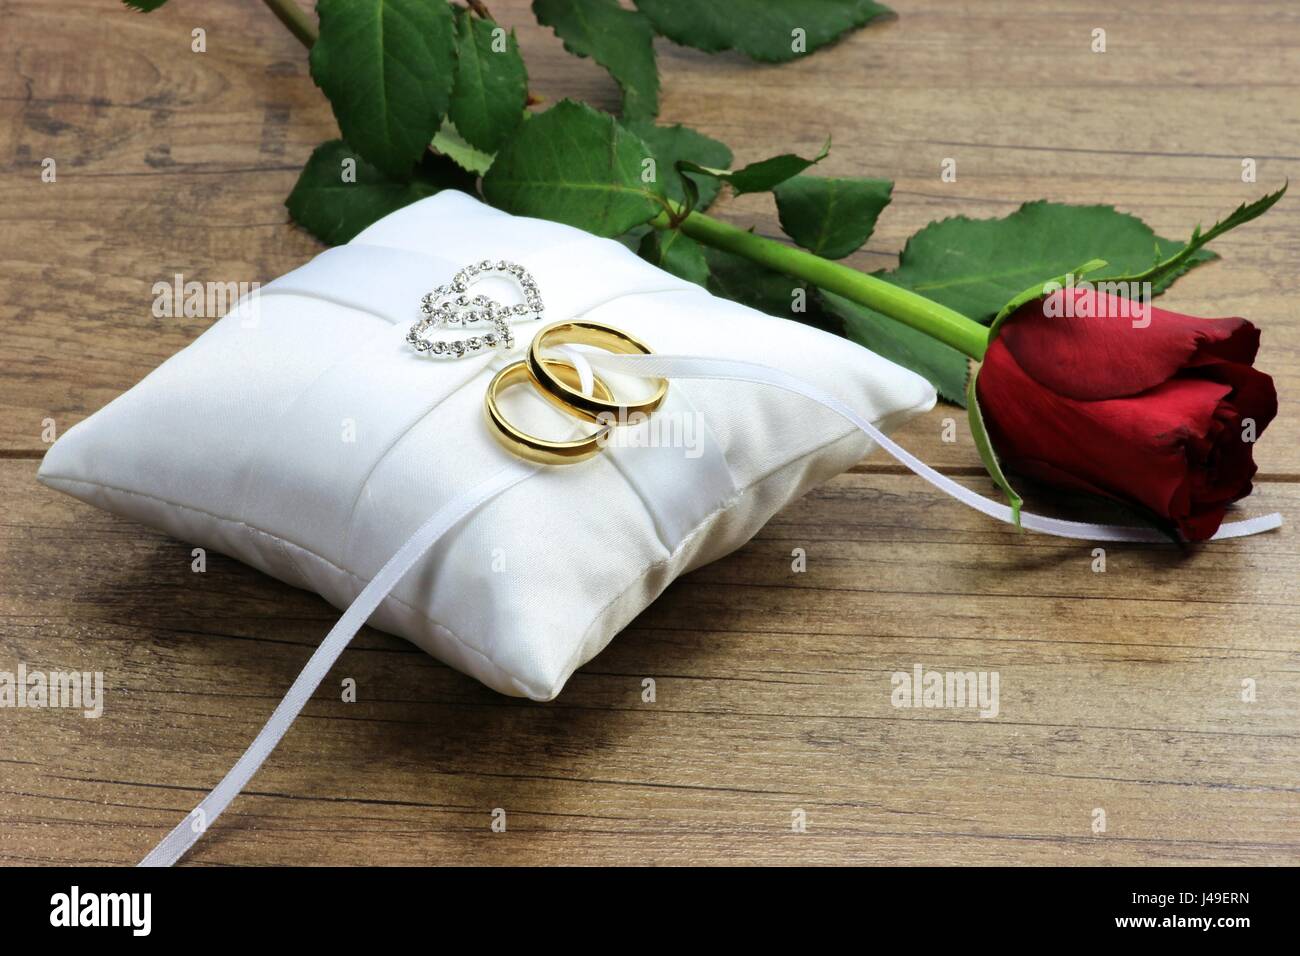 Golden Wedding Rings On White Ringbearer Pillow Stock Photo, Picture and  Royalty Free Image. Image 51171706.